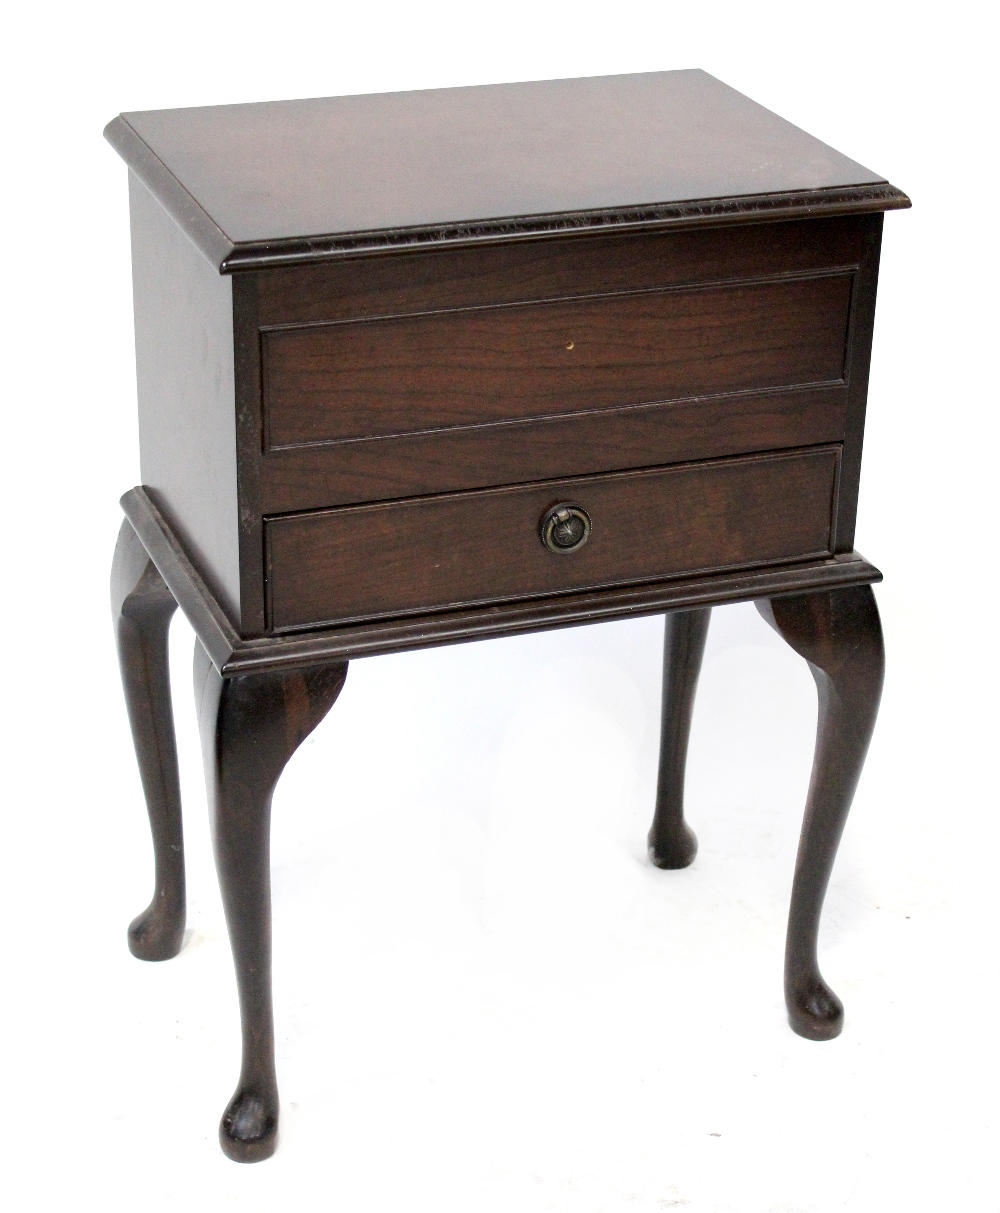 A Georgian-style stained wood sewing table with lift-up lid and single shelf on cabriole legs,